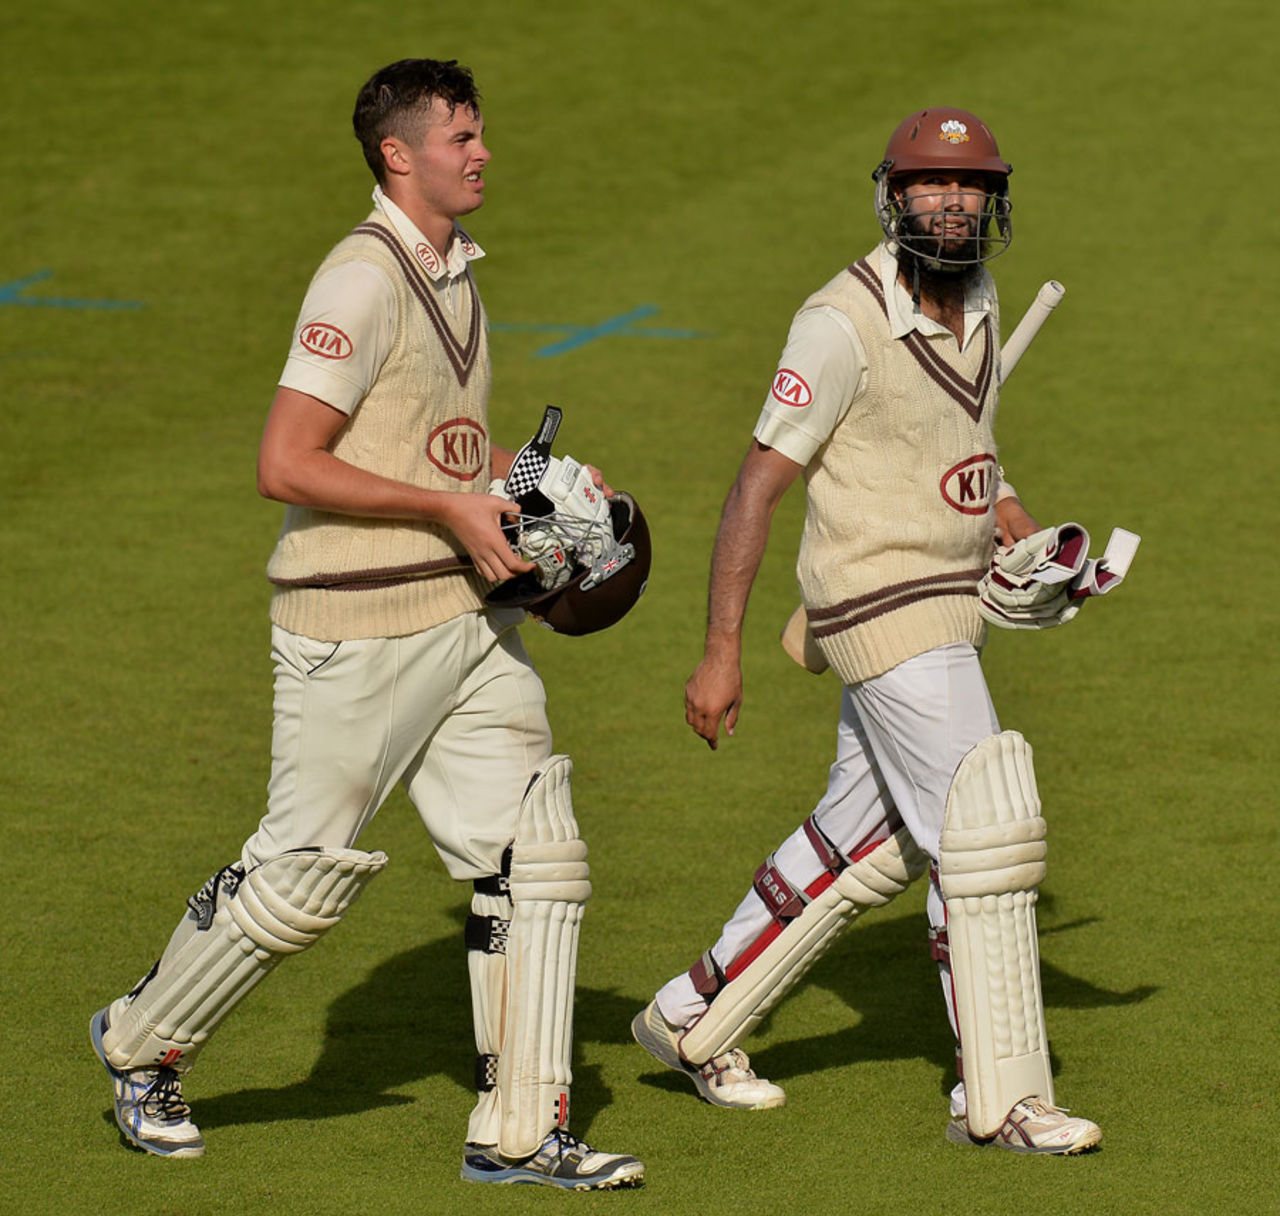 Dominic Sibley and Hashim Amla put on 236 for the third wicket, Surrey v Yorkshire, County Championship, Division One, The Oval, 3rd day September 26, 2013